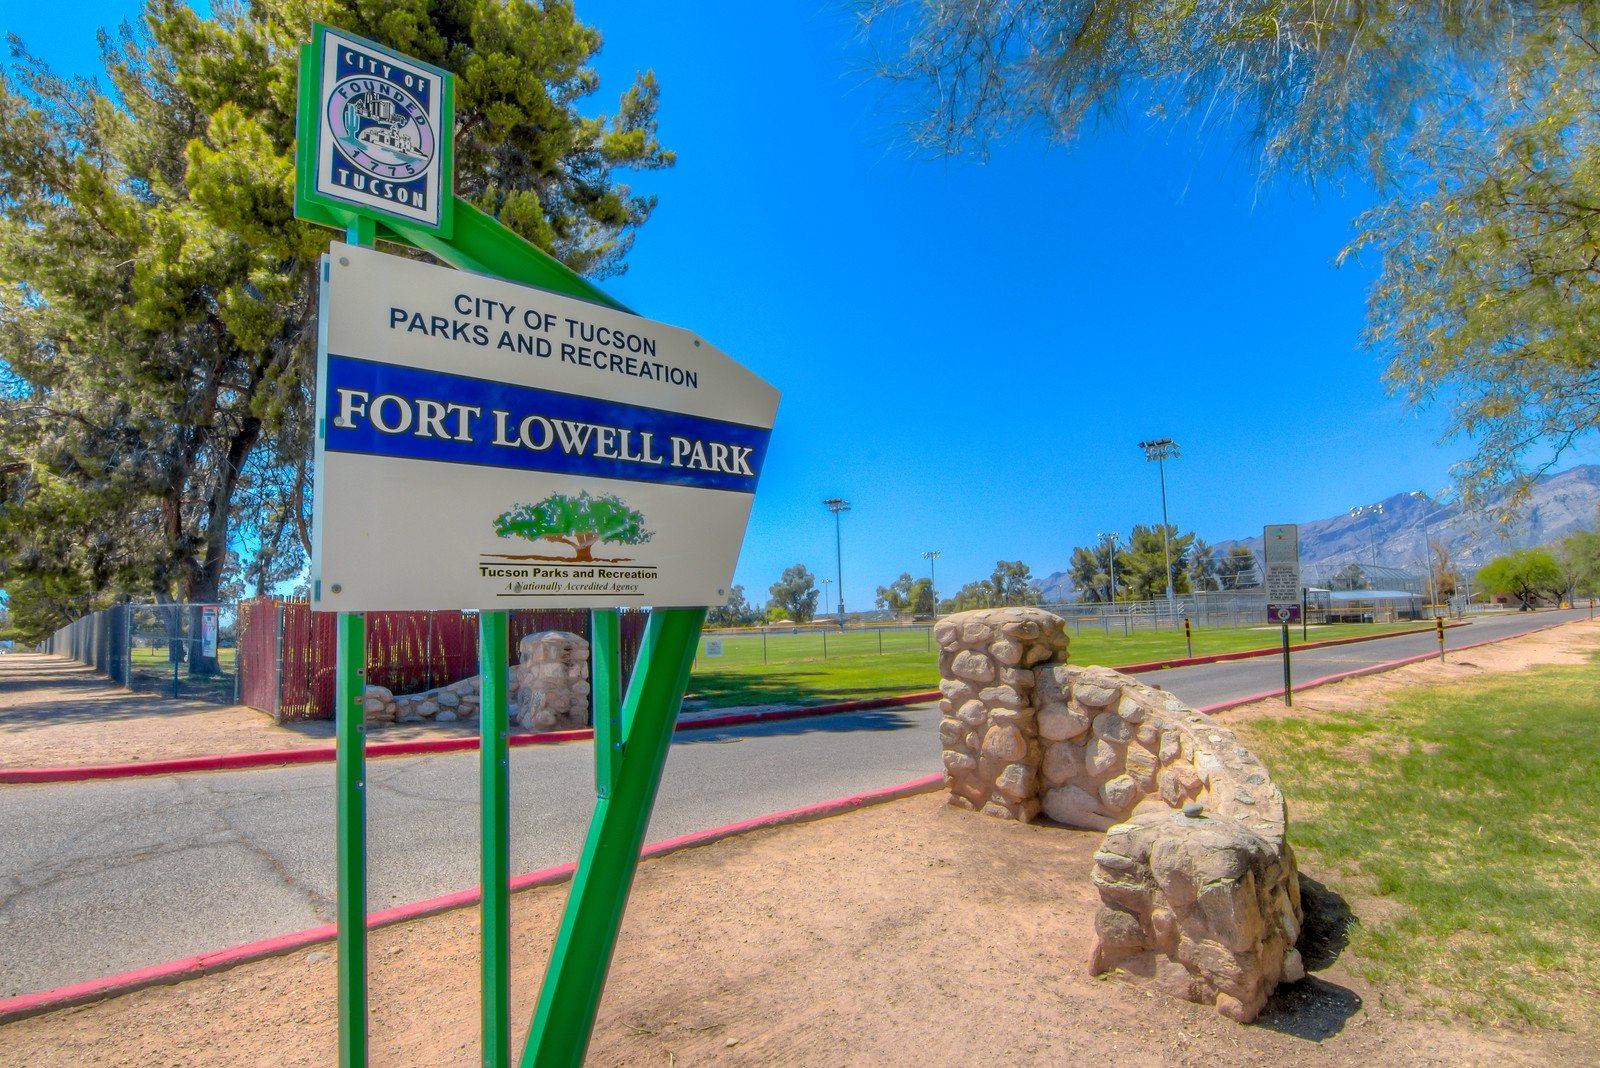 44 Fort Lowell Park photo a.jpg